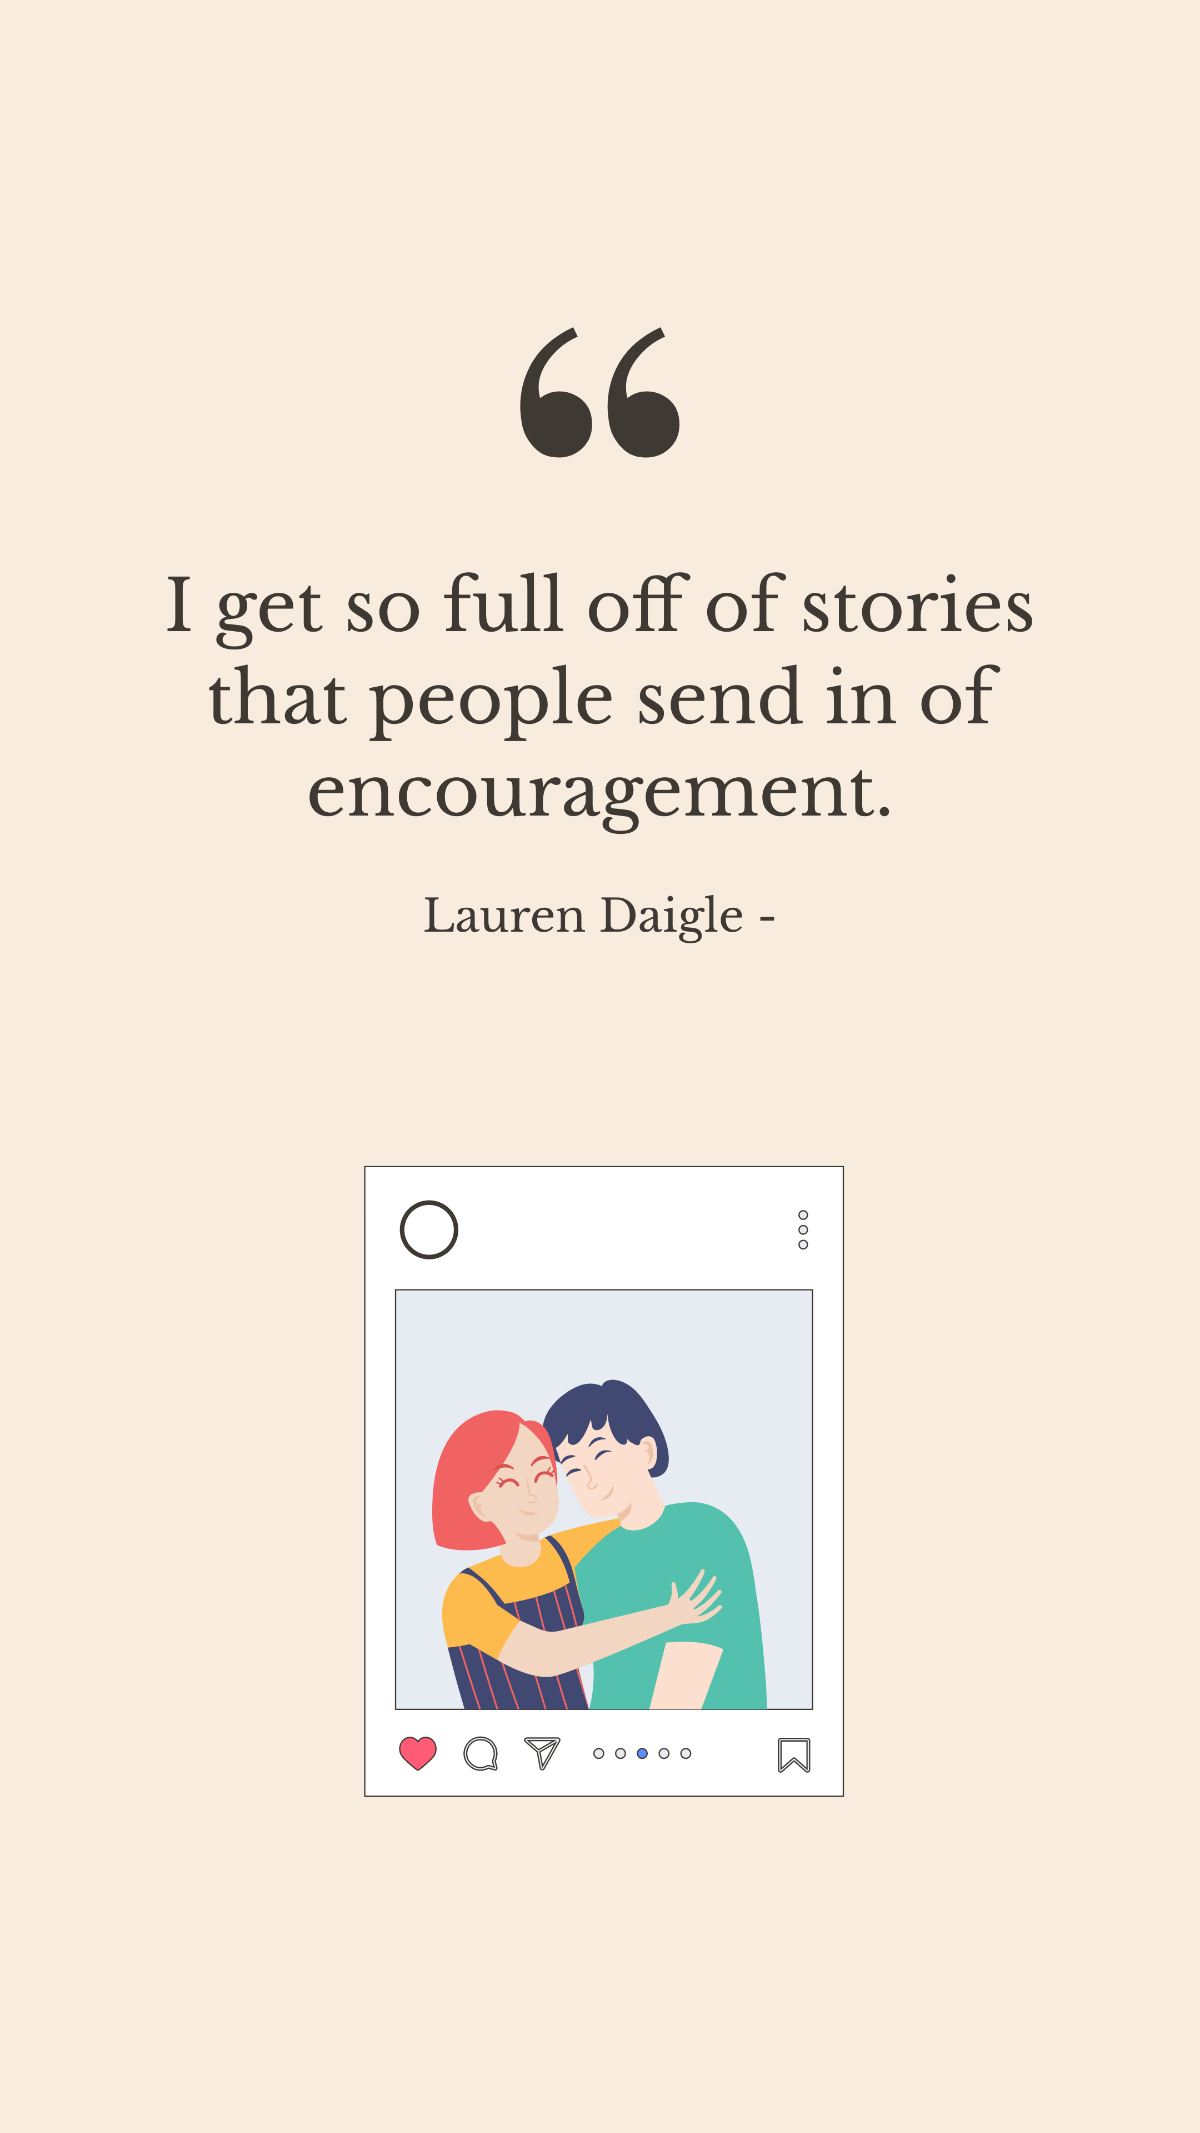 Lauren Daigle - I get so full off of stories that people send in of encouragement. Template